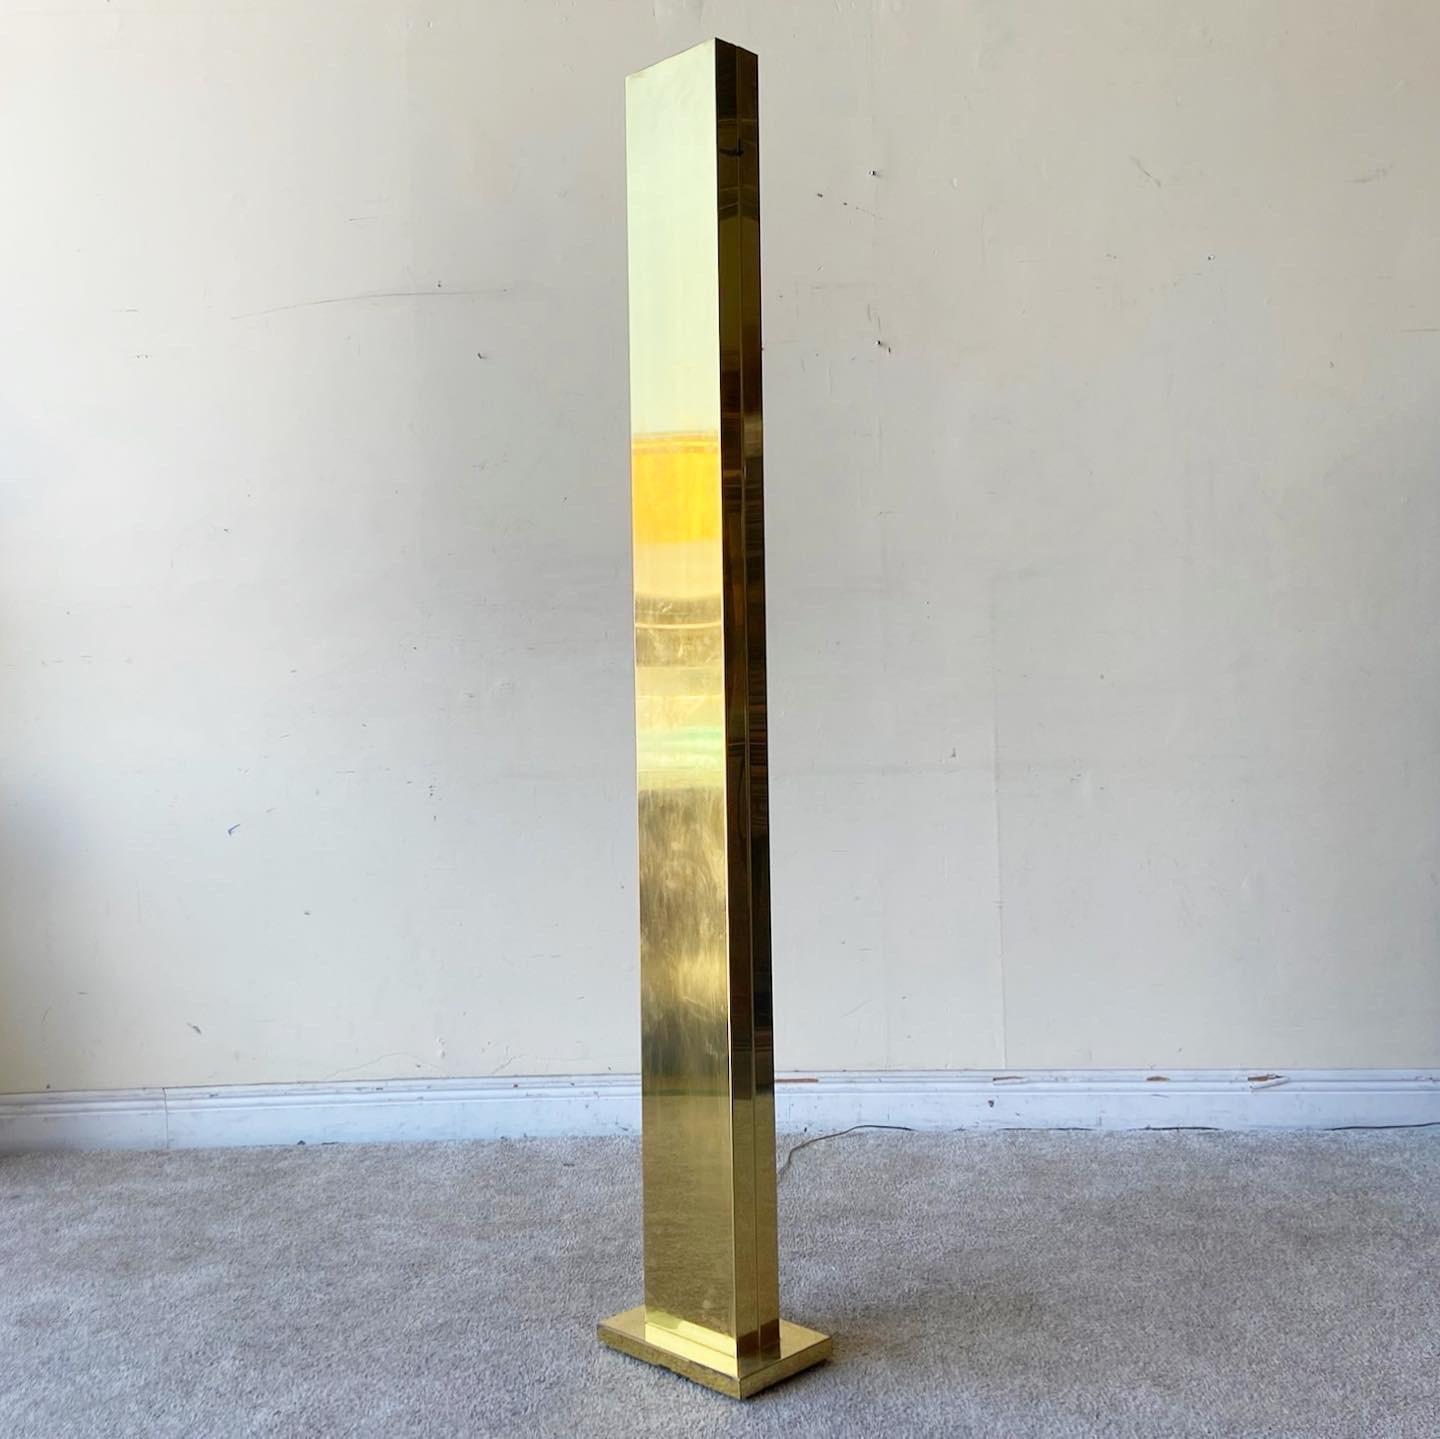 Exceptional mid century modern torch lamp. Features a dimmable light and a gold rectangular body.
